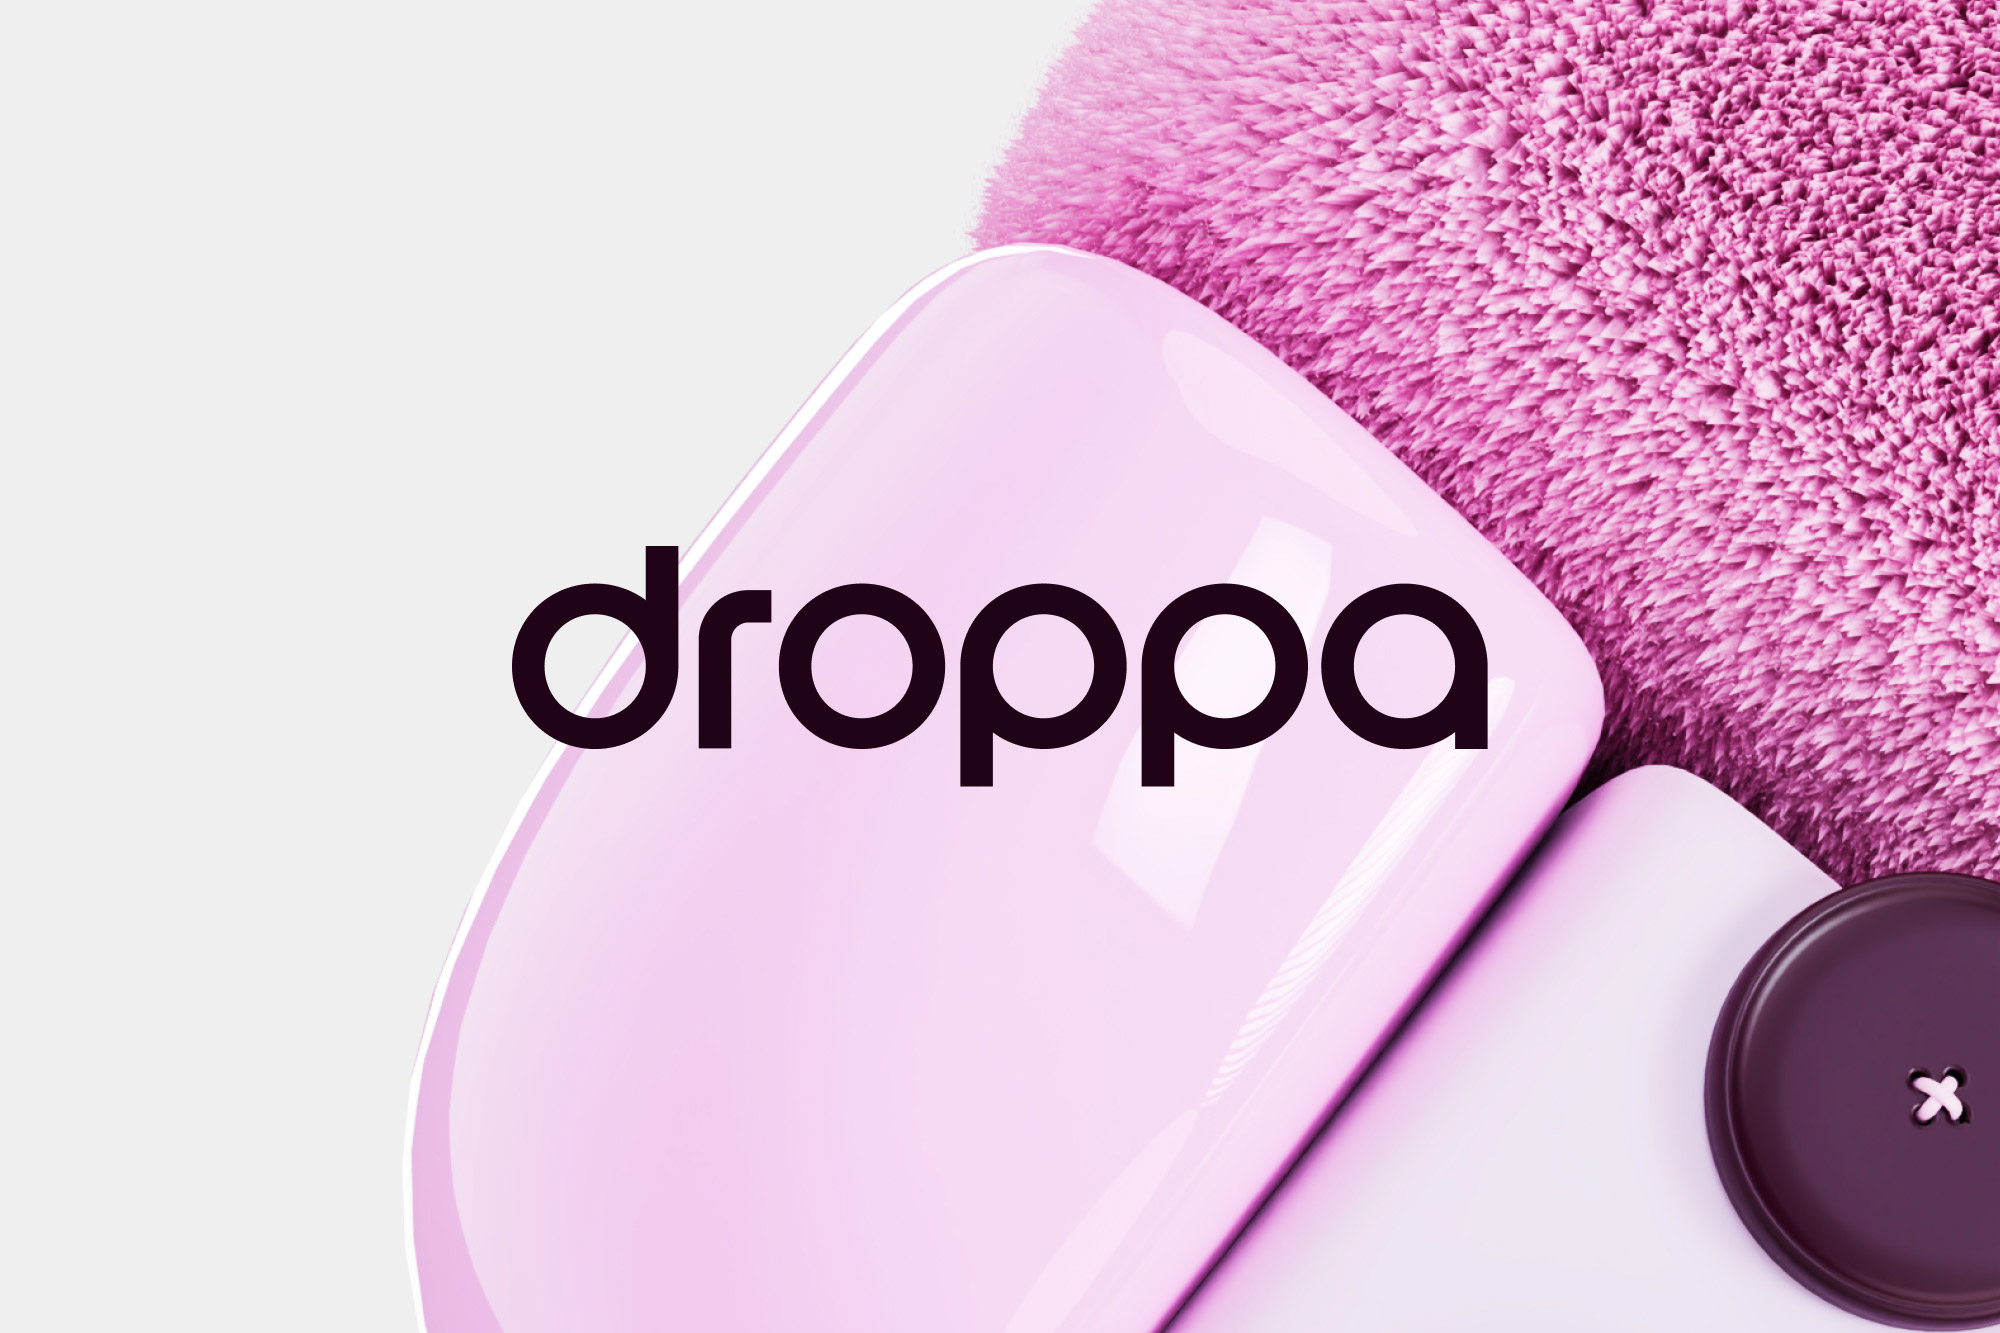 Droppa’s Visual Identity and Web Design: A New Standard for Hassle-Free E-commerce Returns